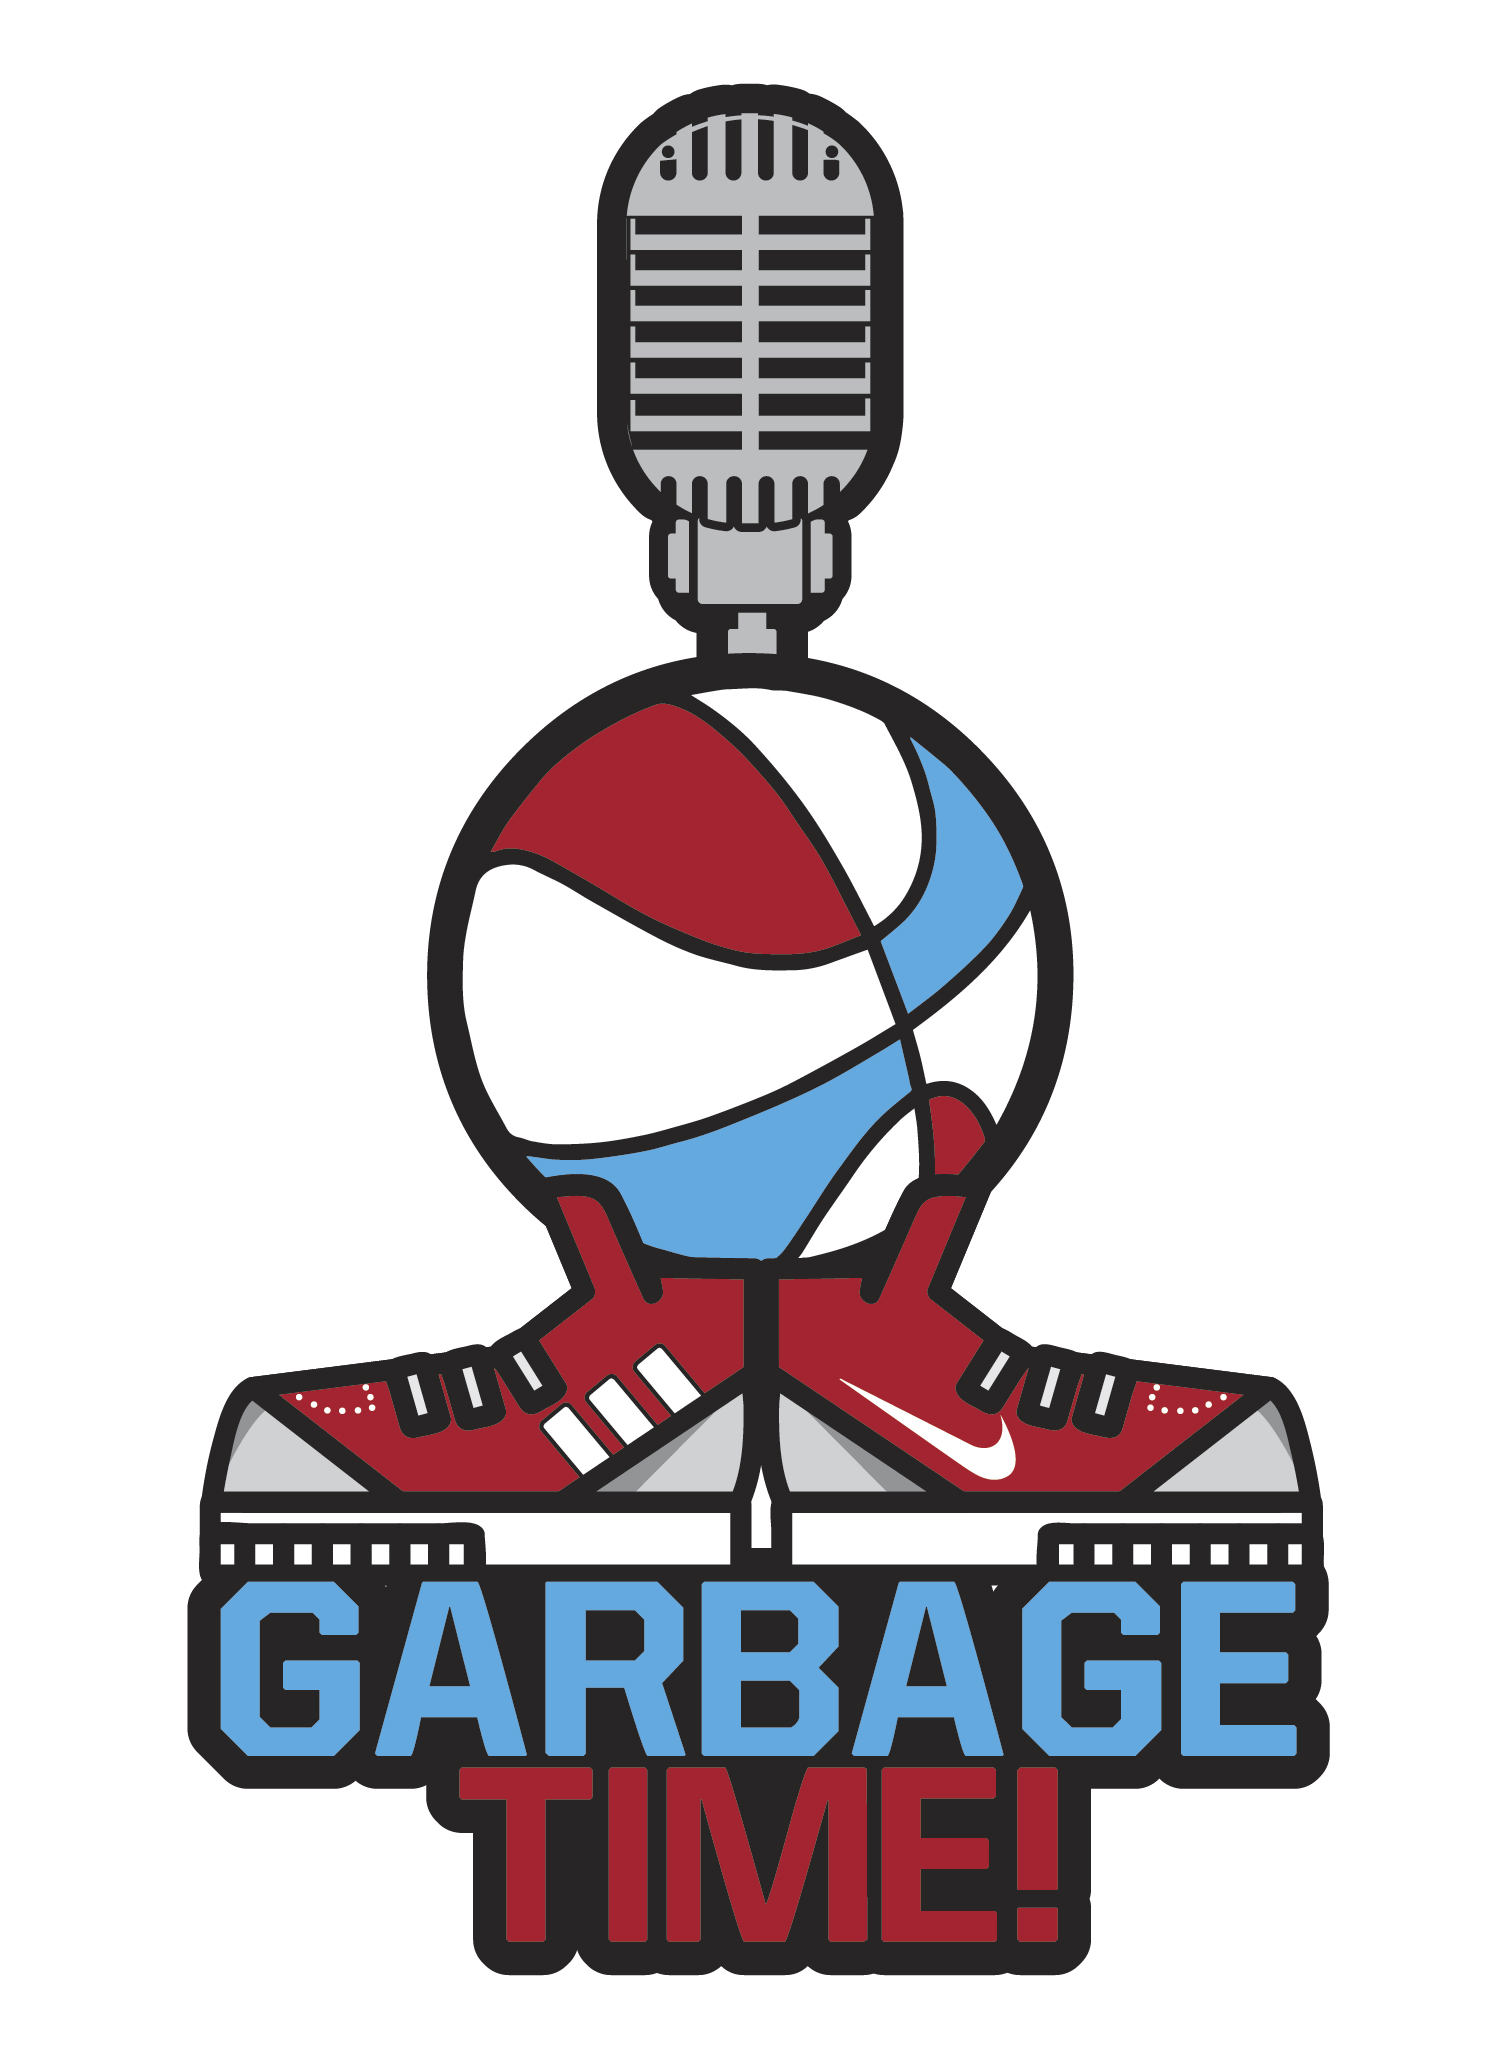 Garbage Time: The End of the LeBron James era